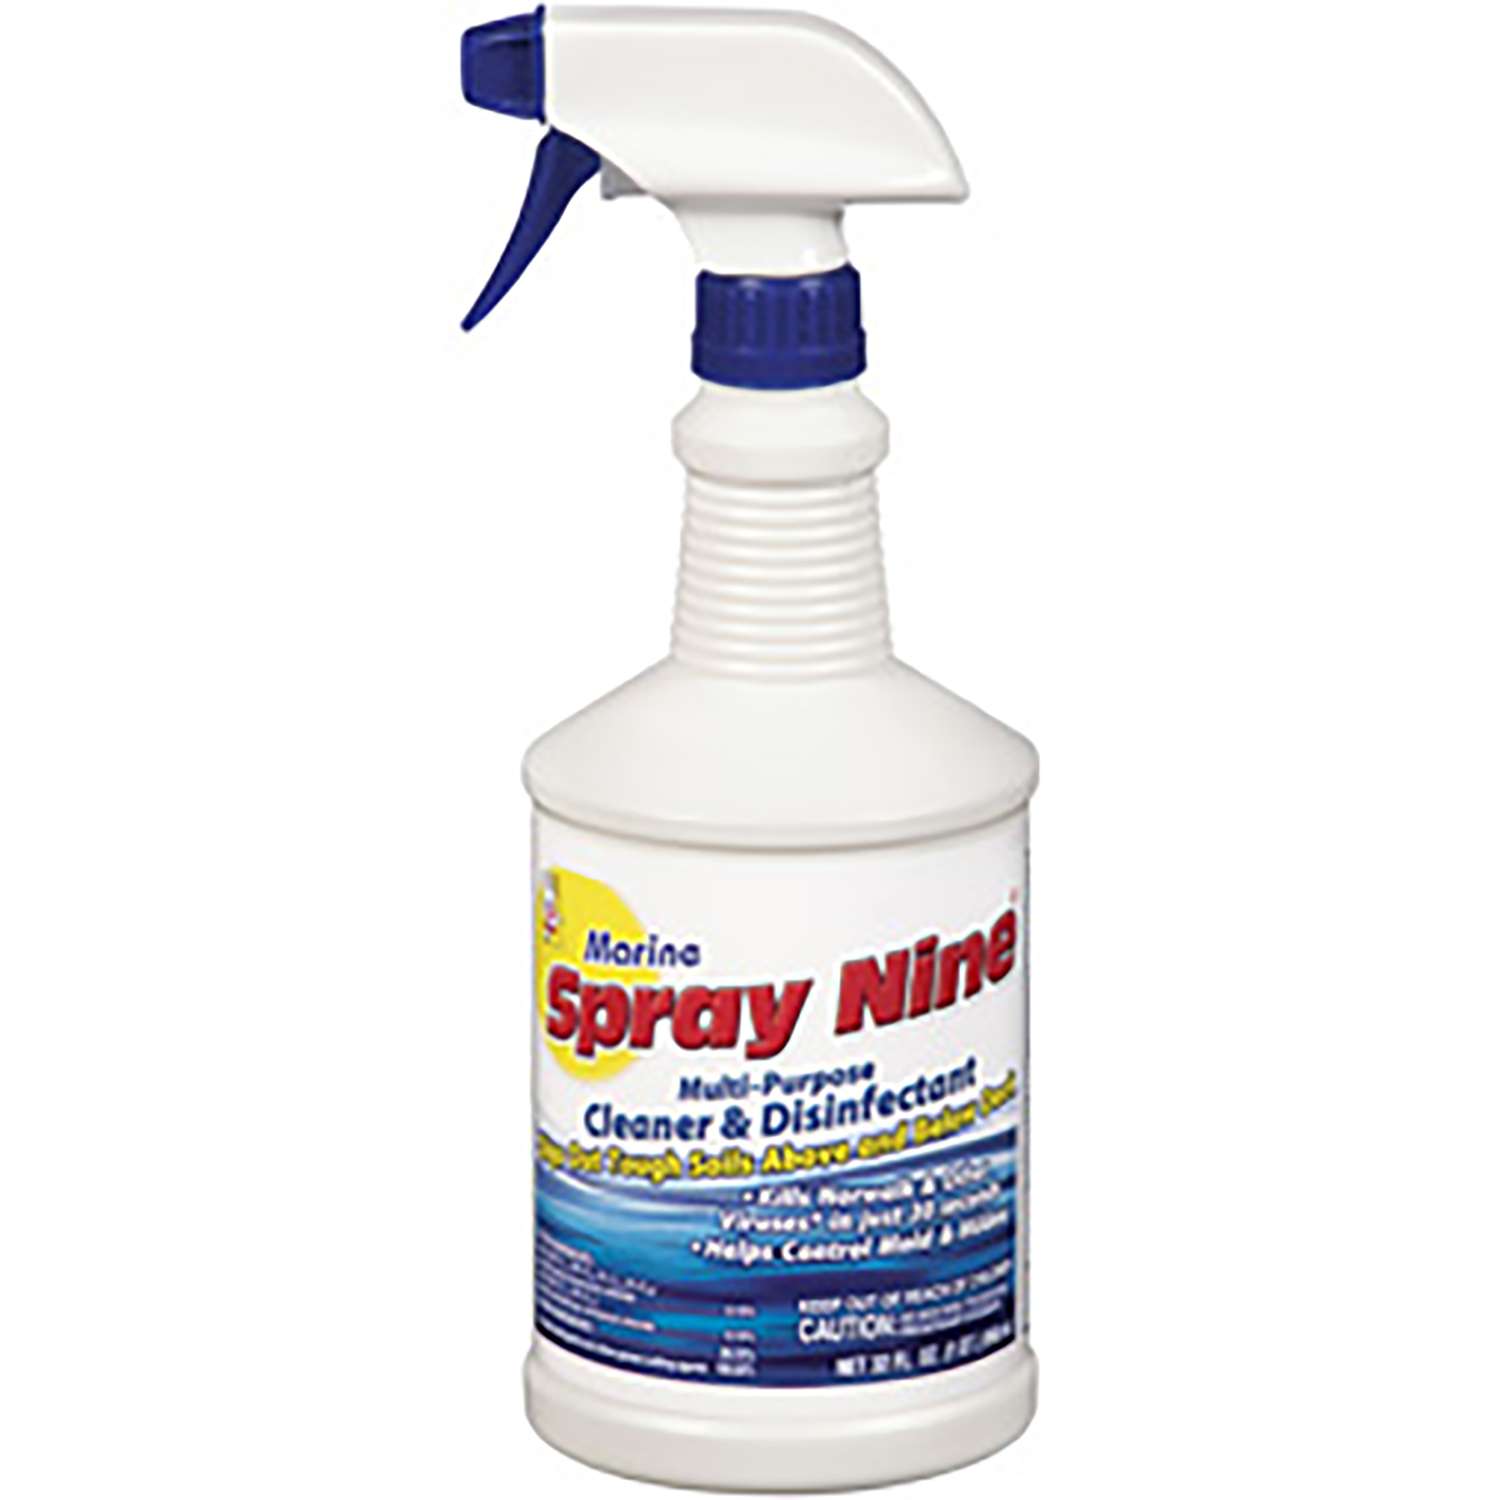  Spray  Nine Marine No Scent Cleaner and Disinfectant  32 oz 